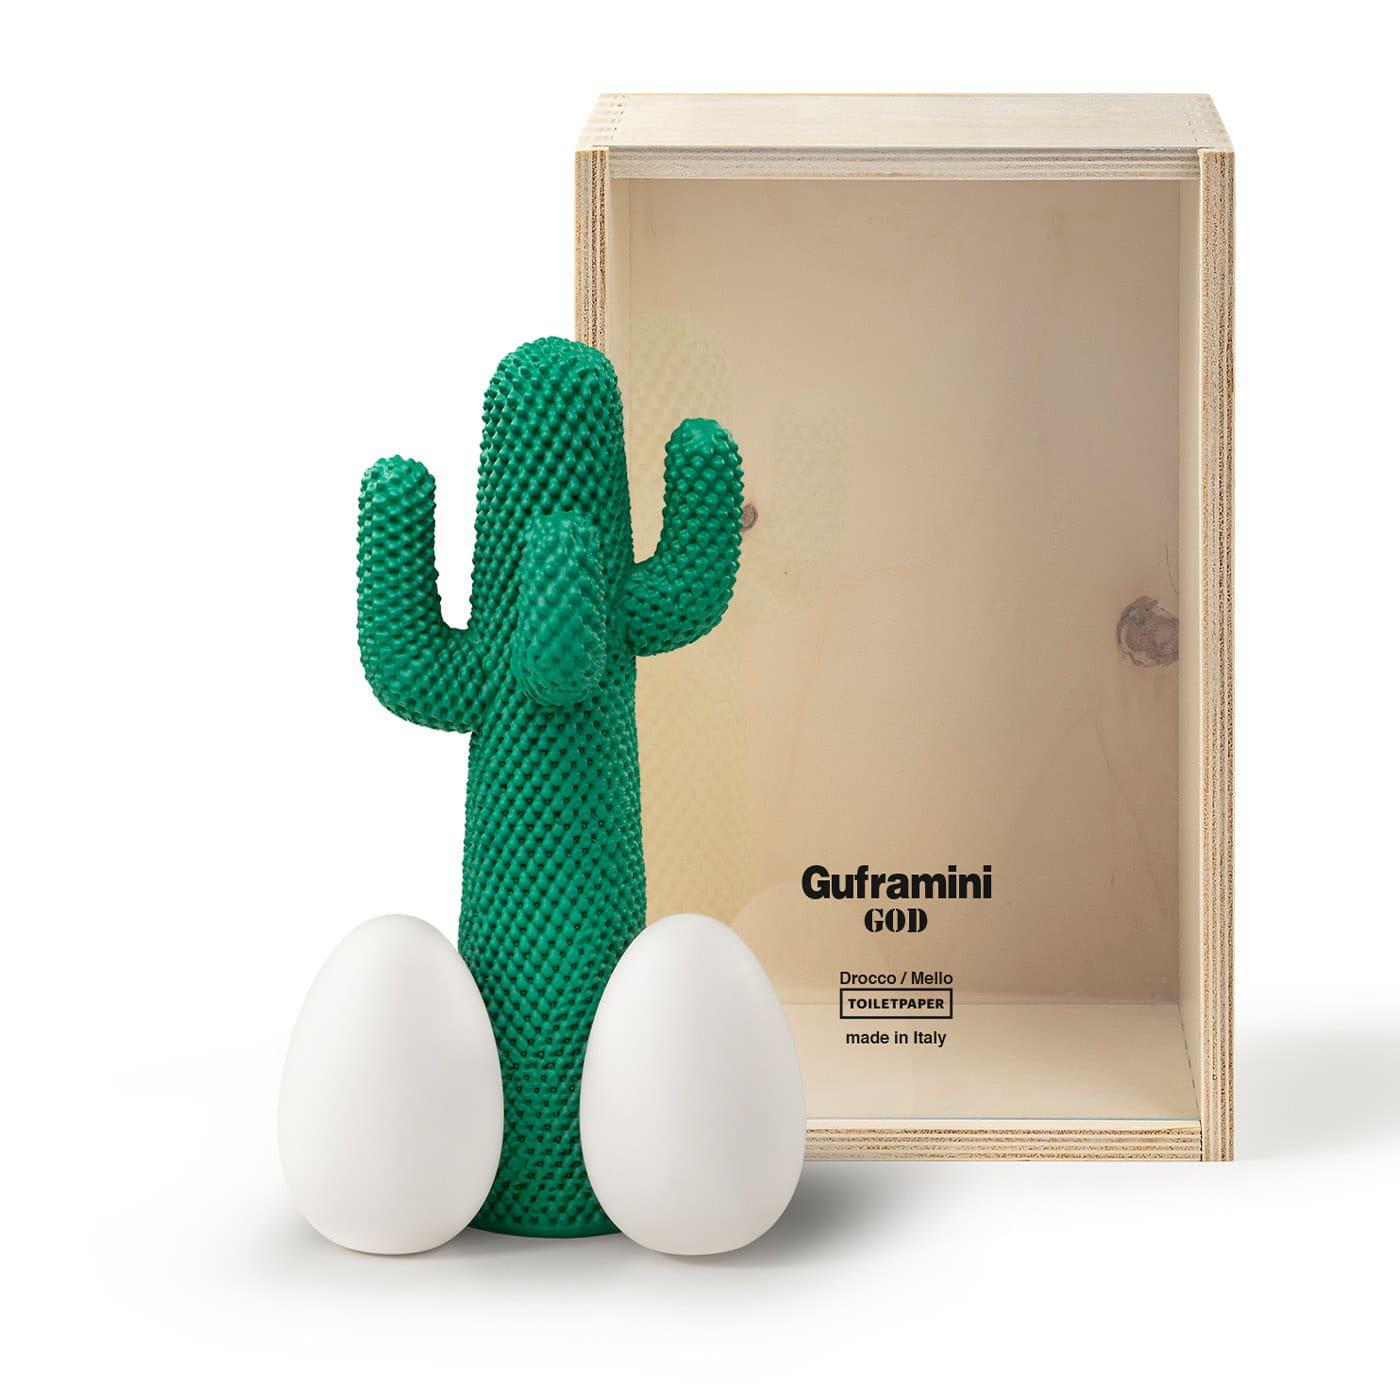 Gufram icons have become smaller and have turned into Guframinis! Designed in a 1:8 scale the new miniatures perfectly reproduce the famous original sculptures. Each 